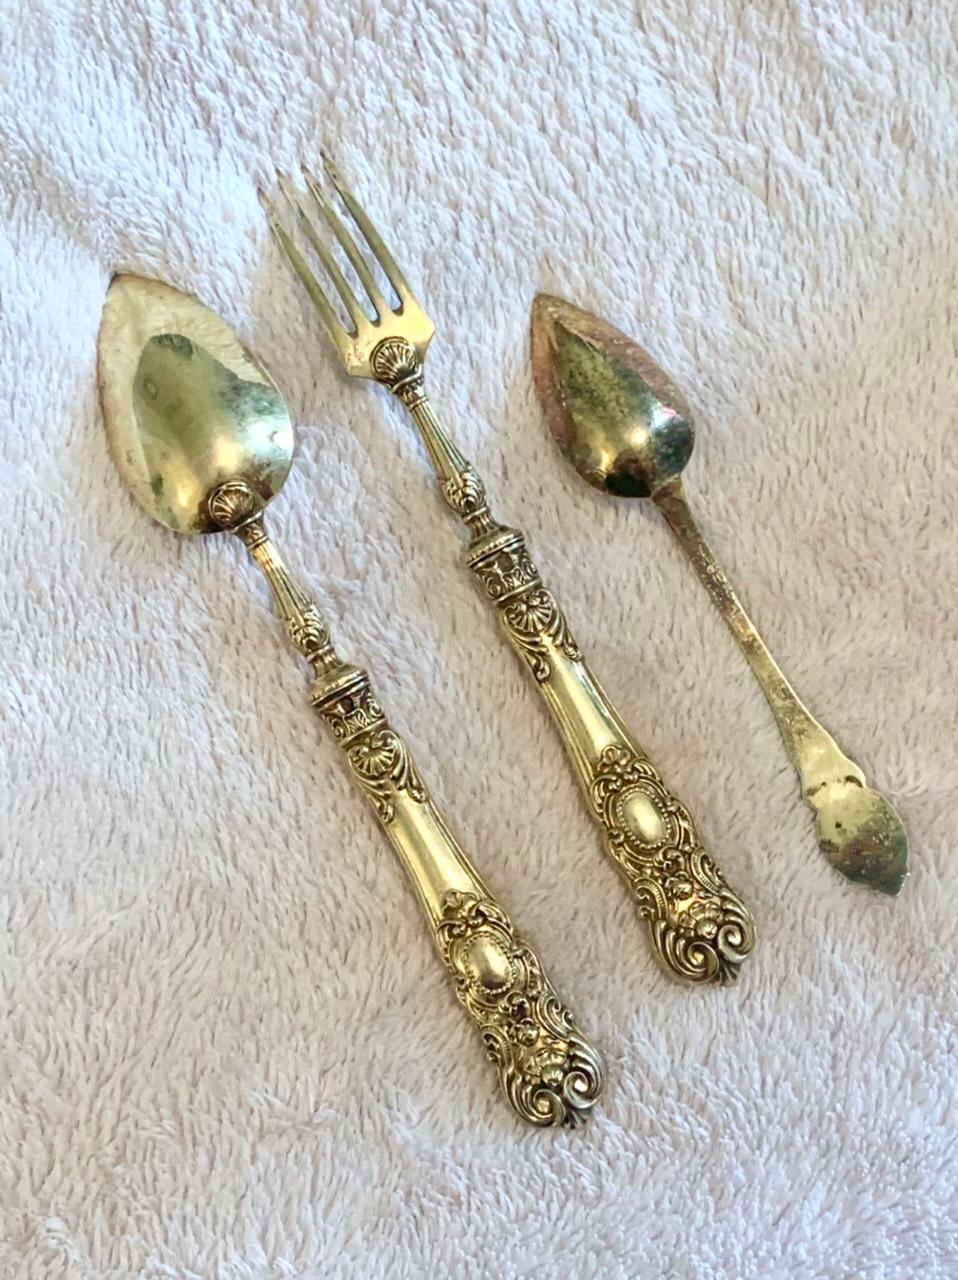 Set worked of gilded Cutlery for entremets. A soup spoon, a fork and a coffee spoon. Very nice set. Shells are visible on the handle of the fork and the spoon making a direct reference to the Louis XIV style. A style used during the Napoleon III